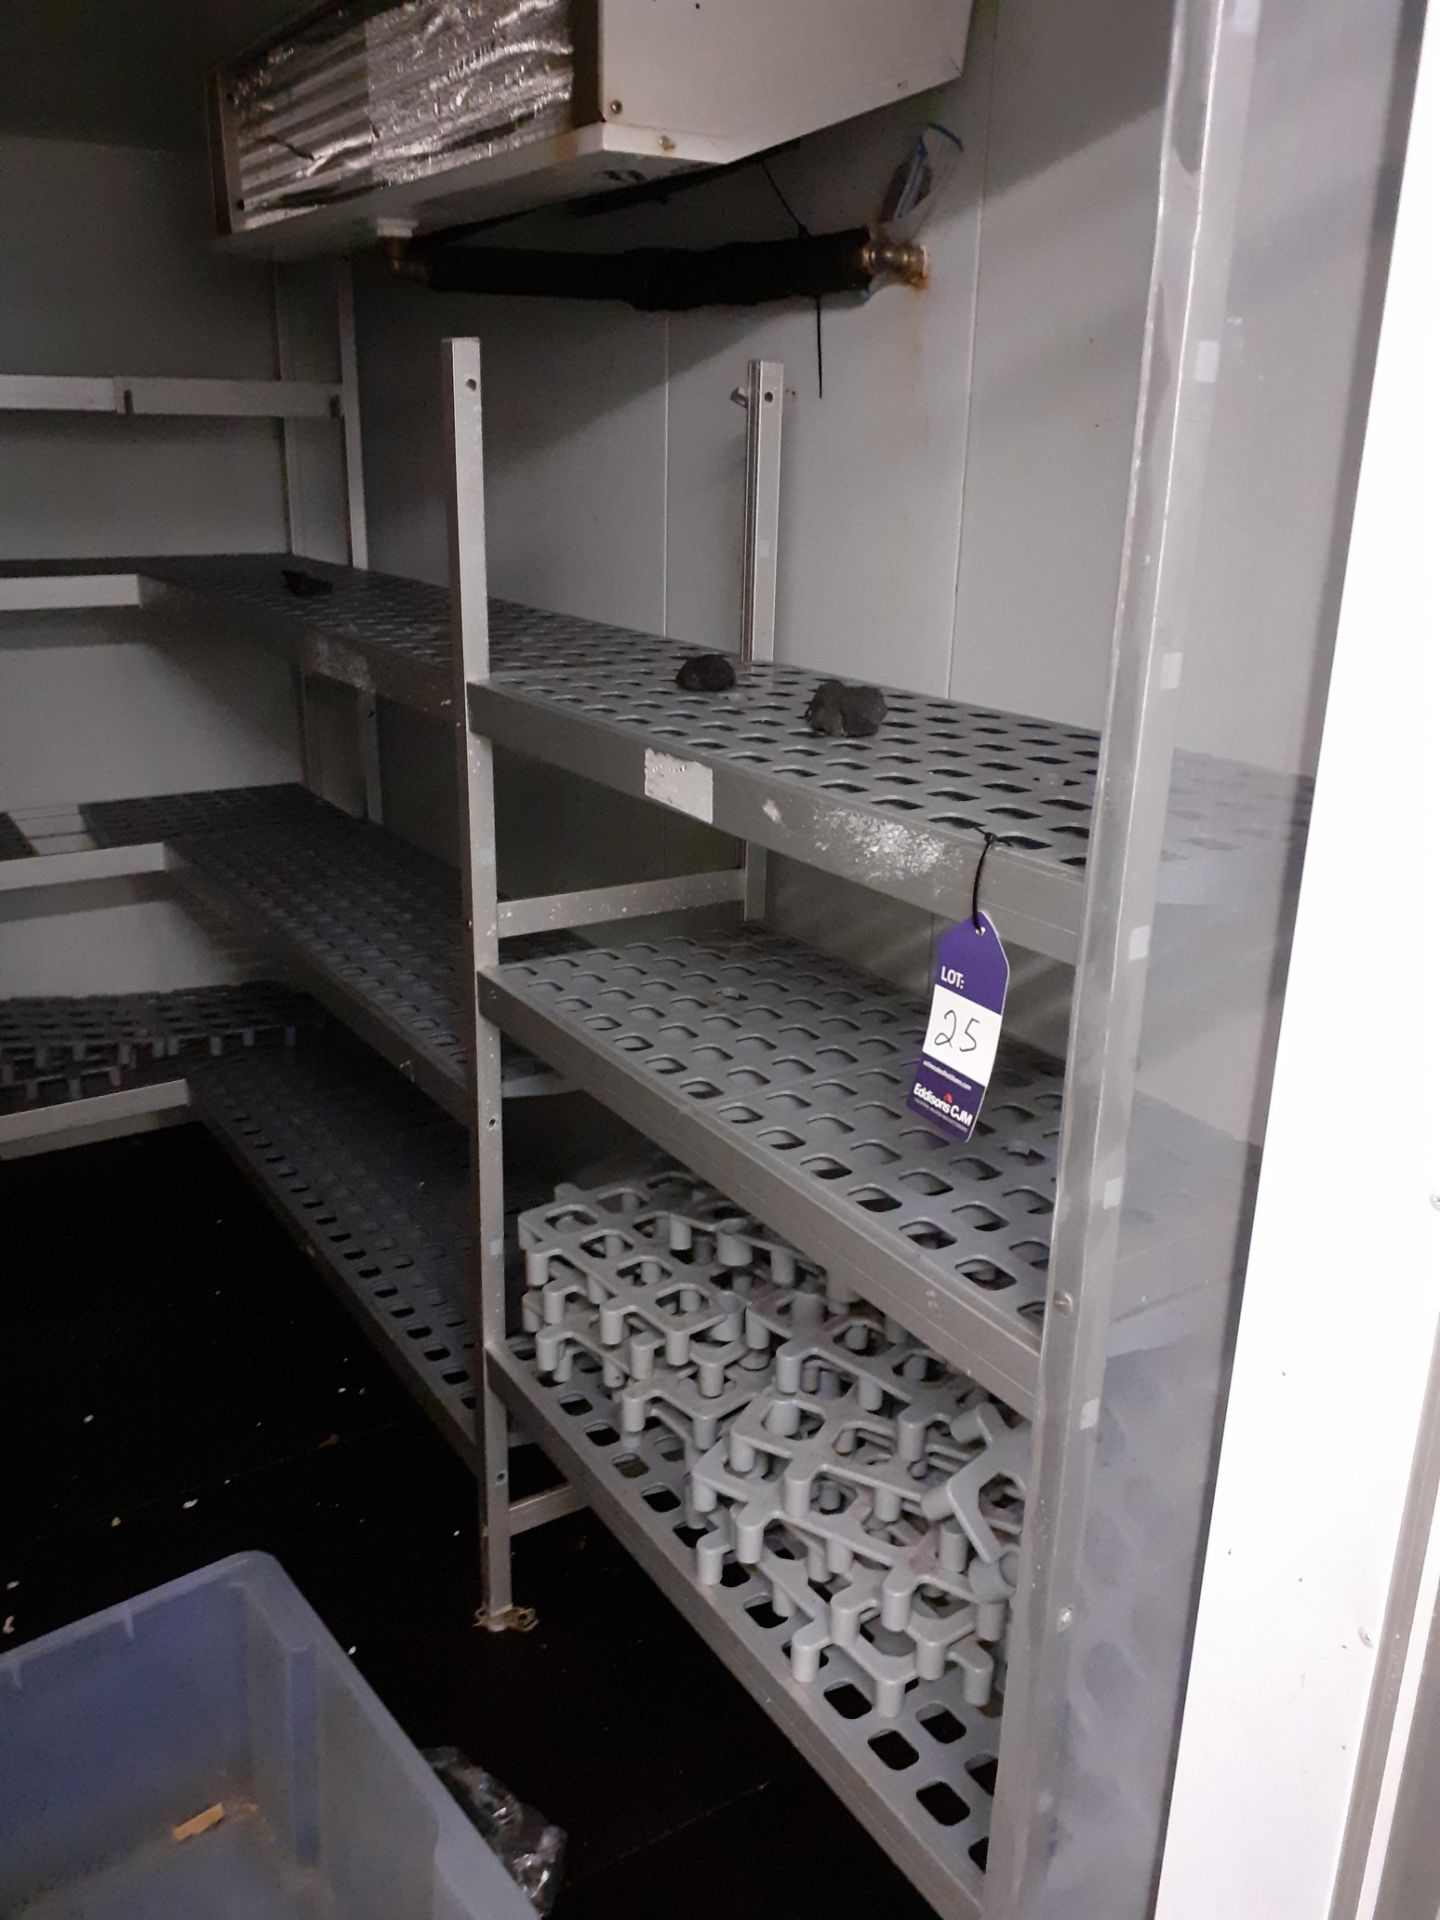 The Aluminium Shelving Units to Coldroom’s as lotted, Located at 14 Leicester Square, London WC2H